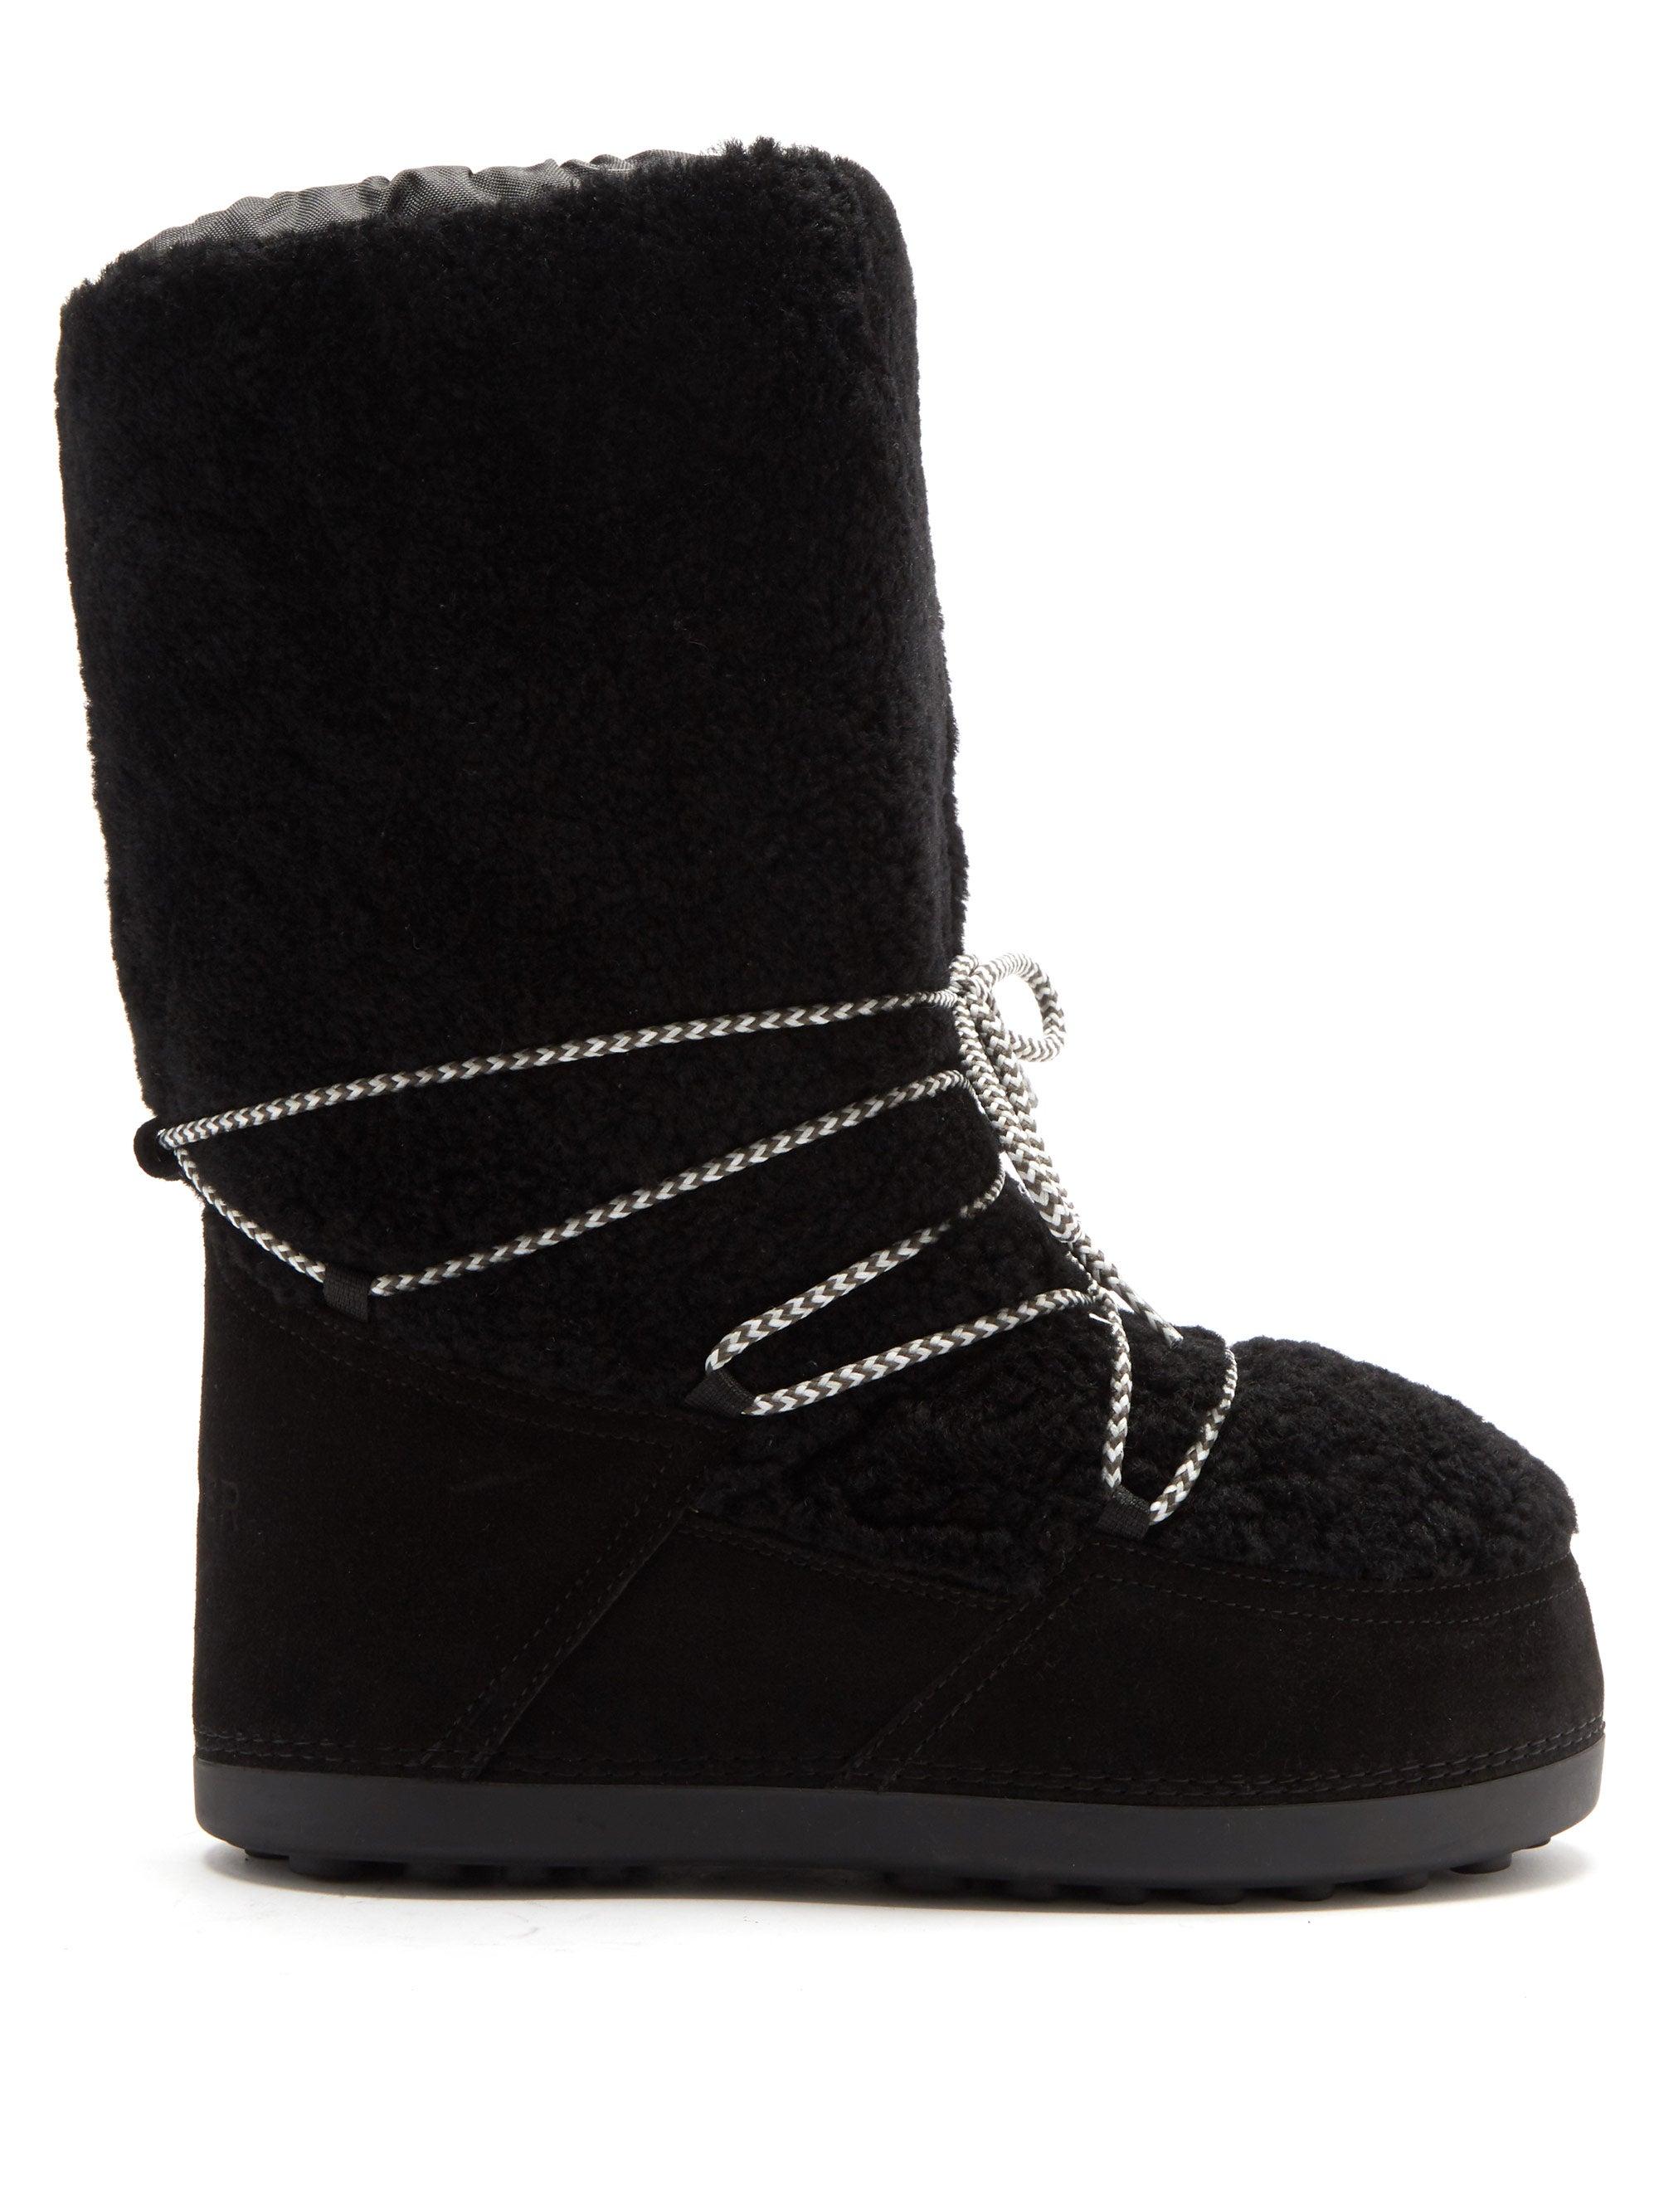 Bogner Cervinia Shearling And Suede Snow Boots in Black - Lyst